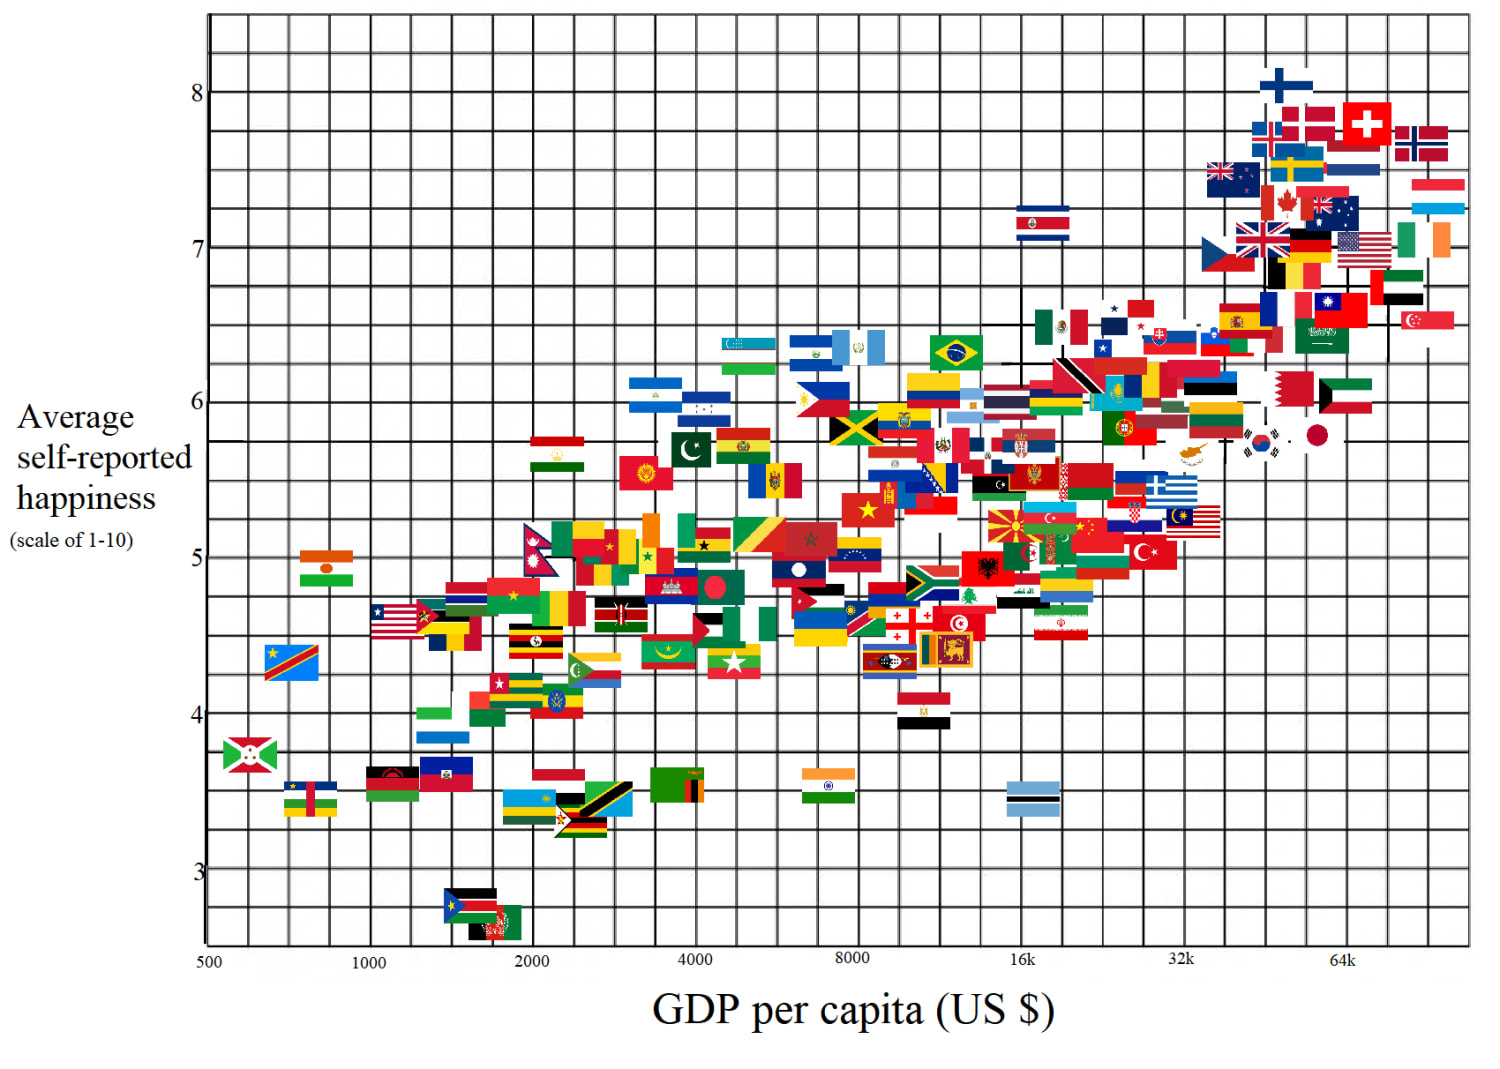 Does a rich country mean a happy country? Scatterplot showing the relationship between per capita GDP and score on the World Happiness Report